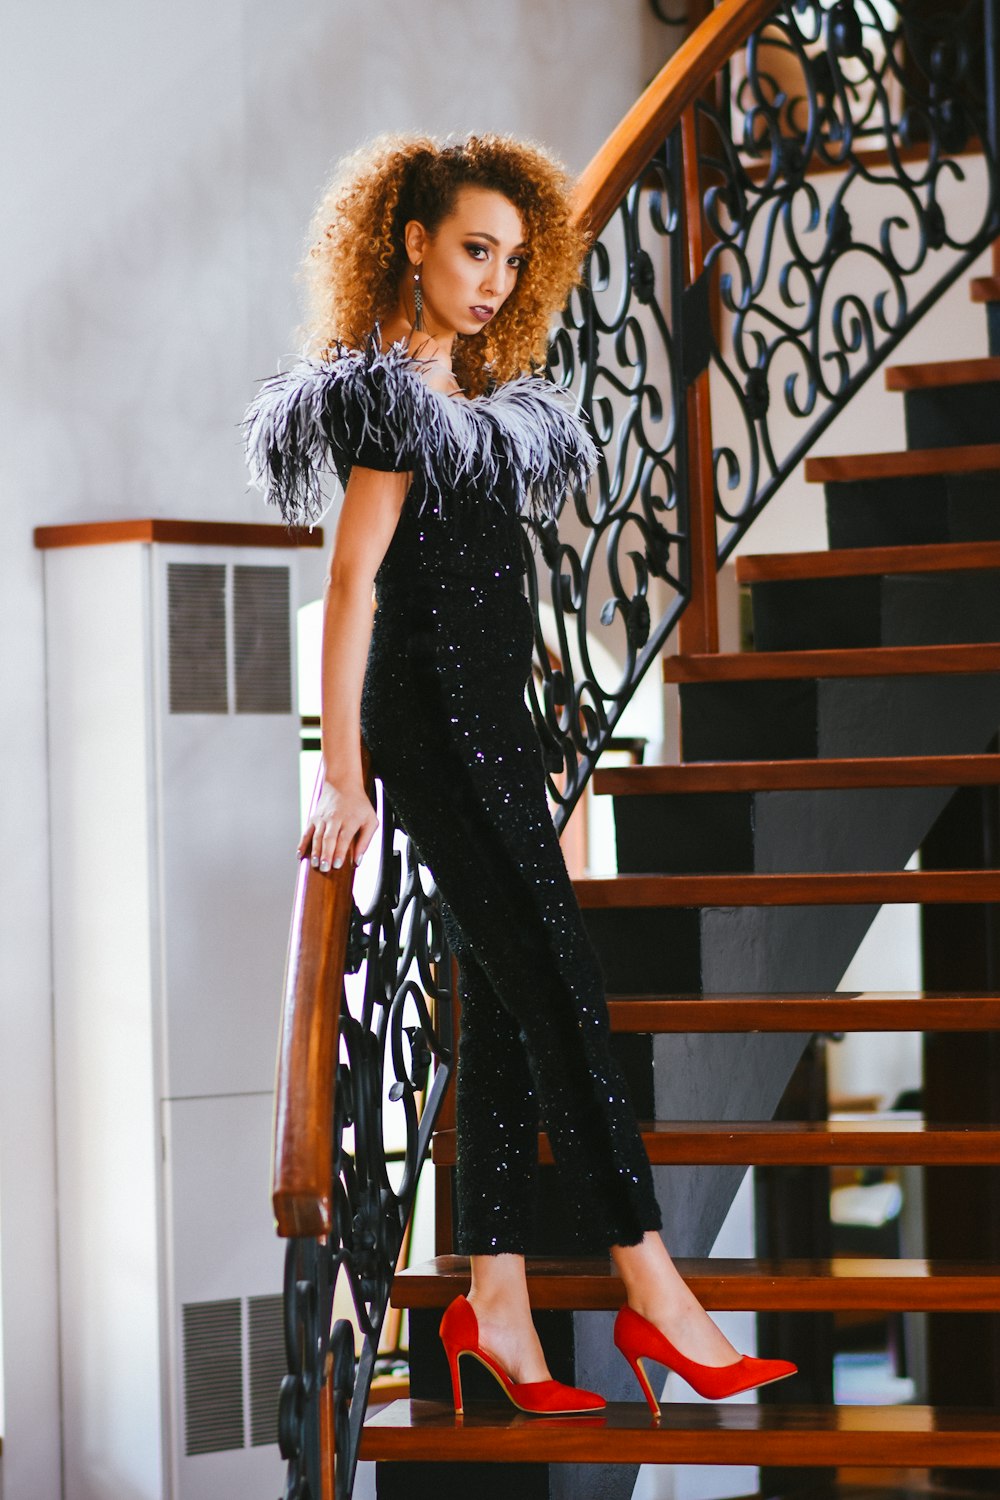 woman in black dress standing on staircase